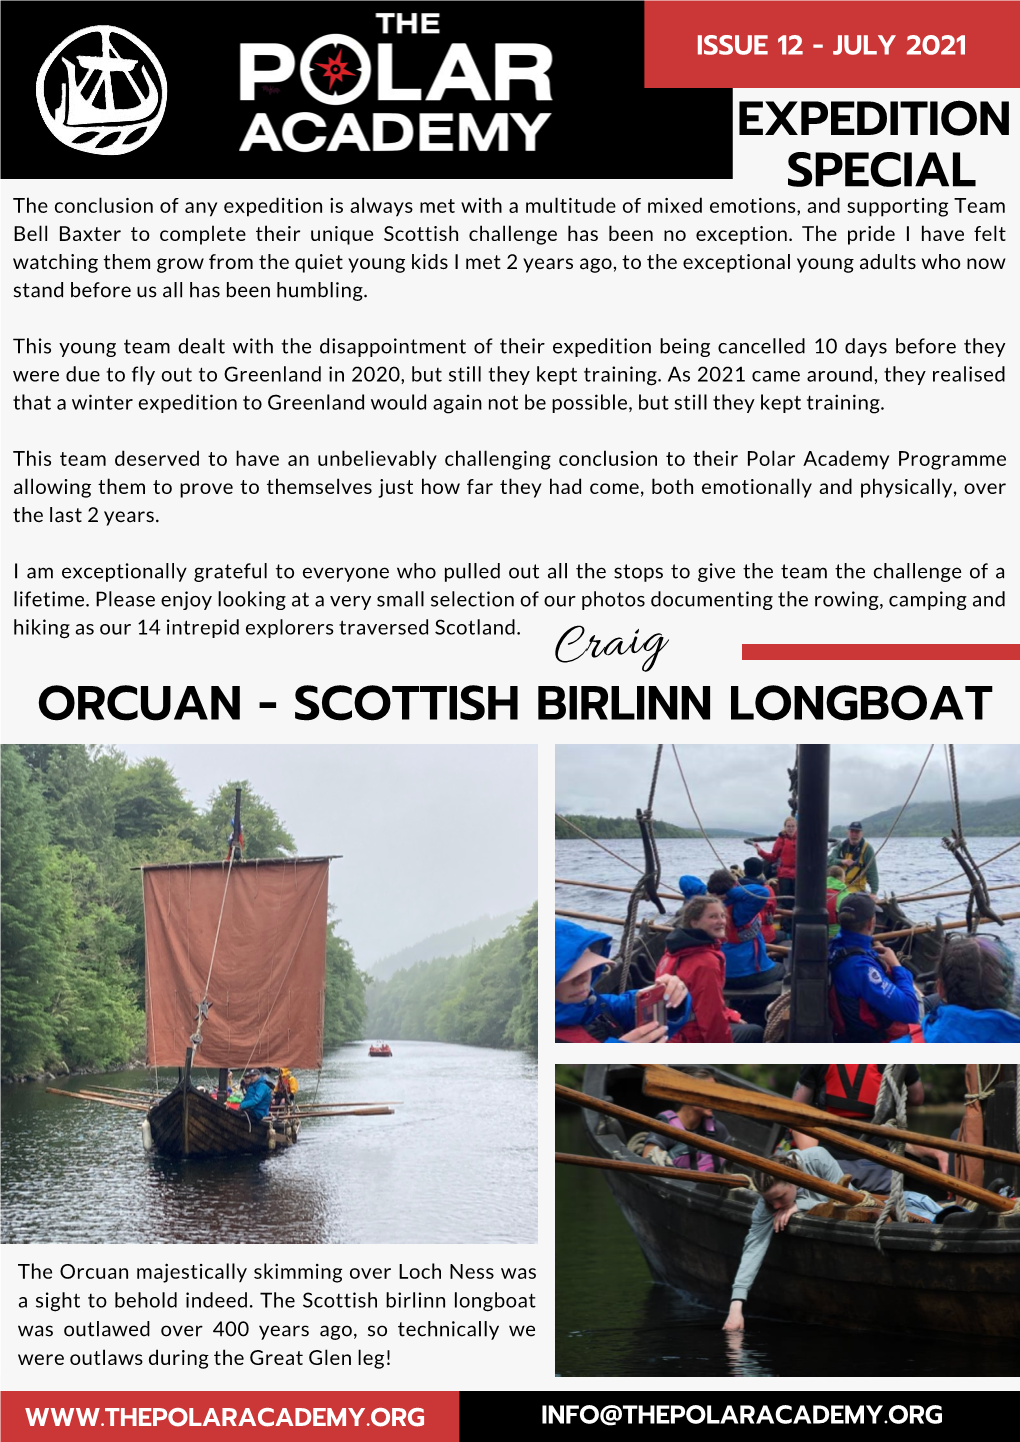 ISSUE 12 - JULY 2021 CALEDONIAN CANAL 38 Miles of the Great Glen Are Made up of the Picturesque Loch Lochy, Loch Oich and Loch Ness